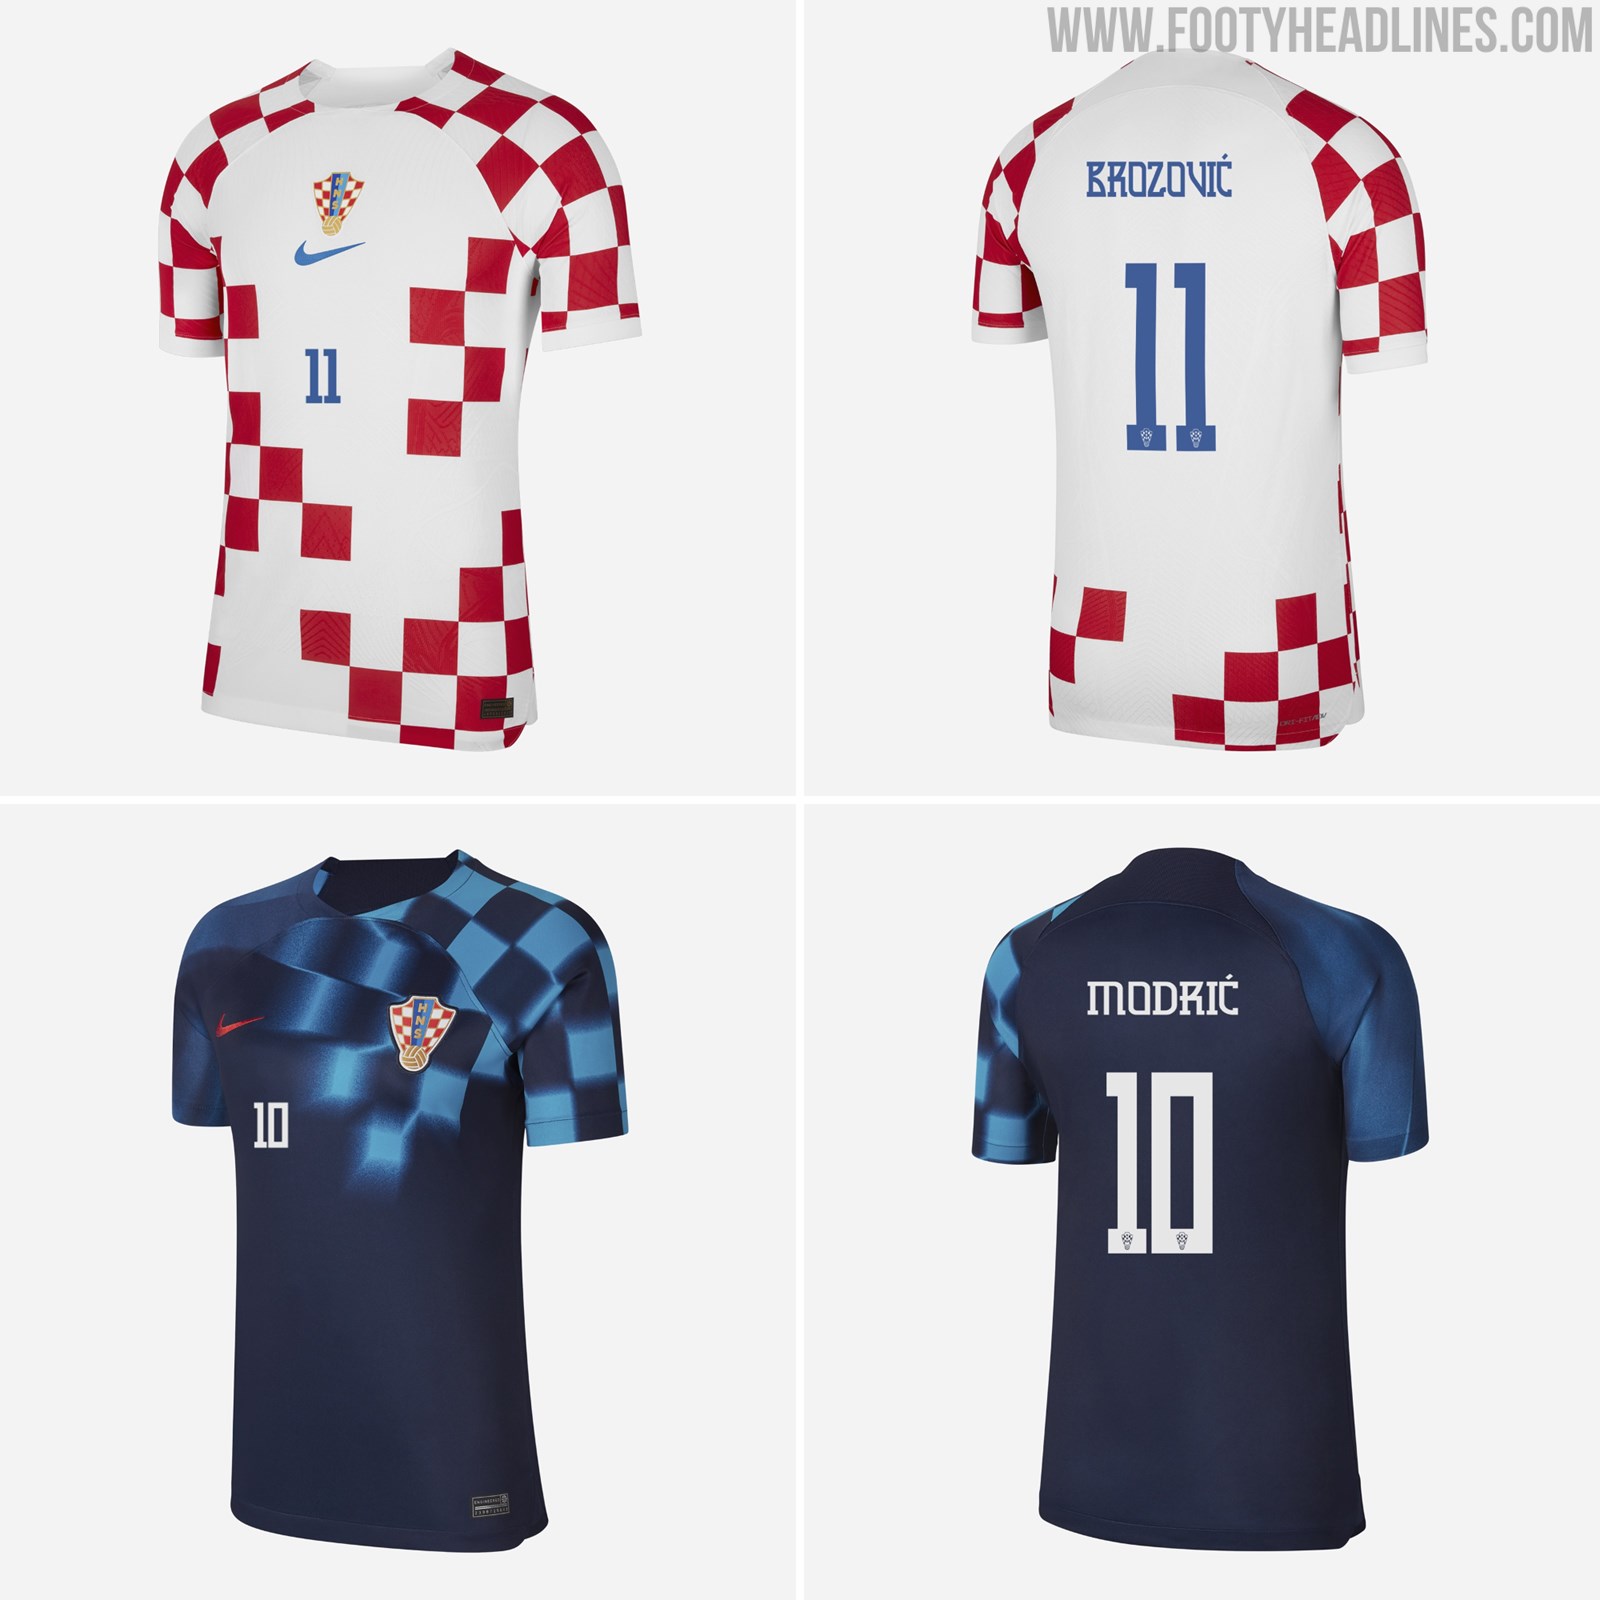 Current Croatia National Team Jerseys Worn for Last Time, New Design Coming  for 2022 World Cup - Total Croatia